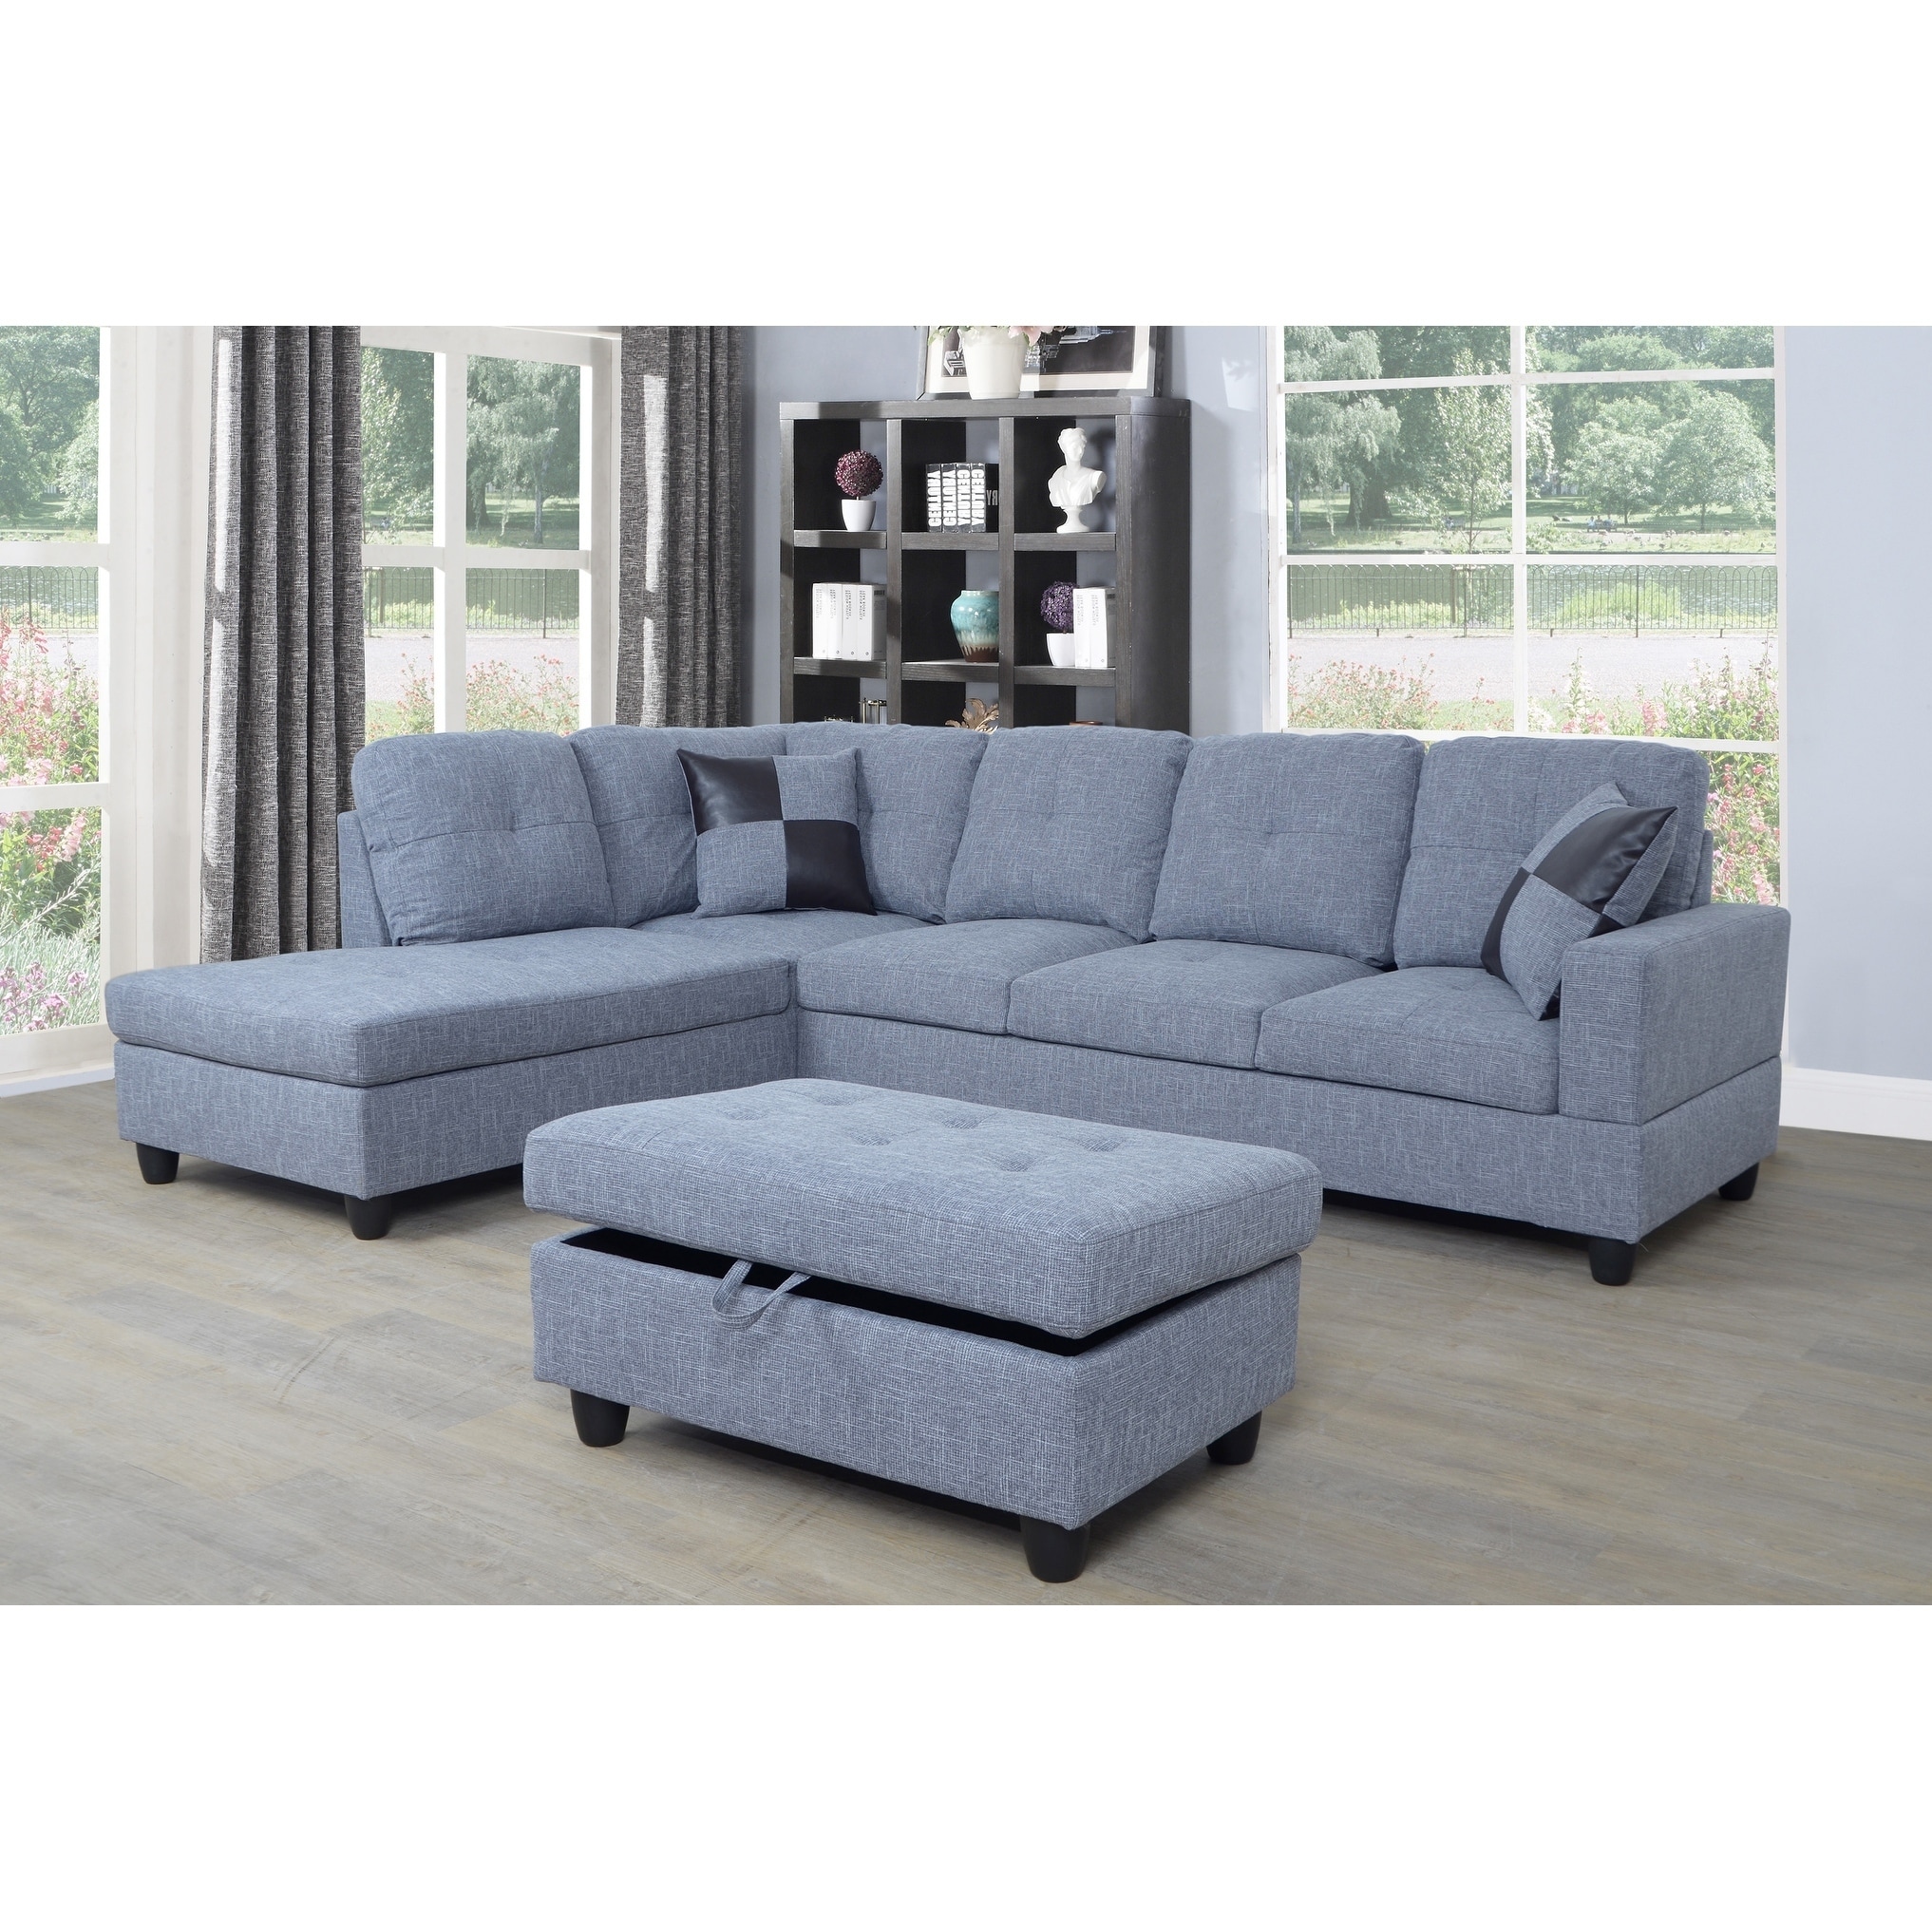 Contemporary Linen Upholstered 3-PCS Sectional Sofa Chaise with Ottoman Storage by Golden Coast Furniture